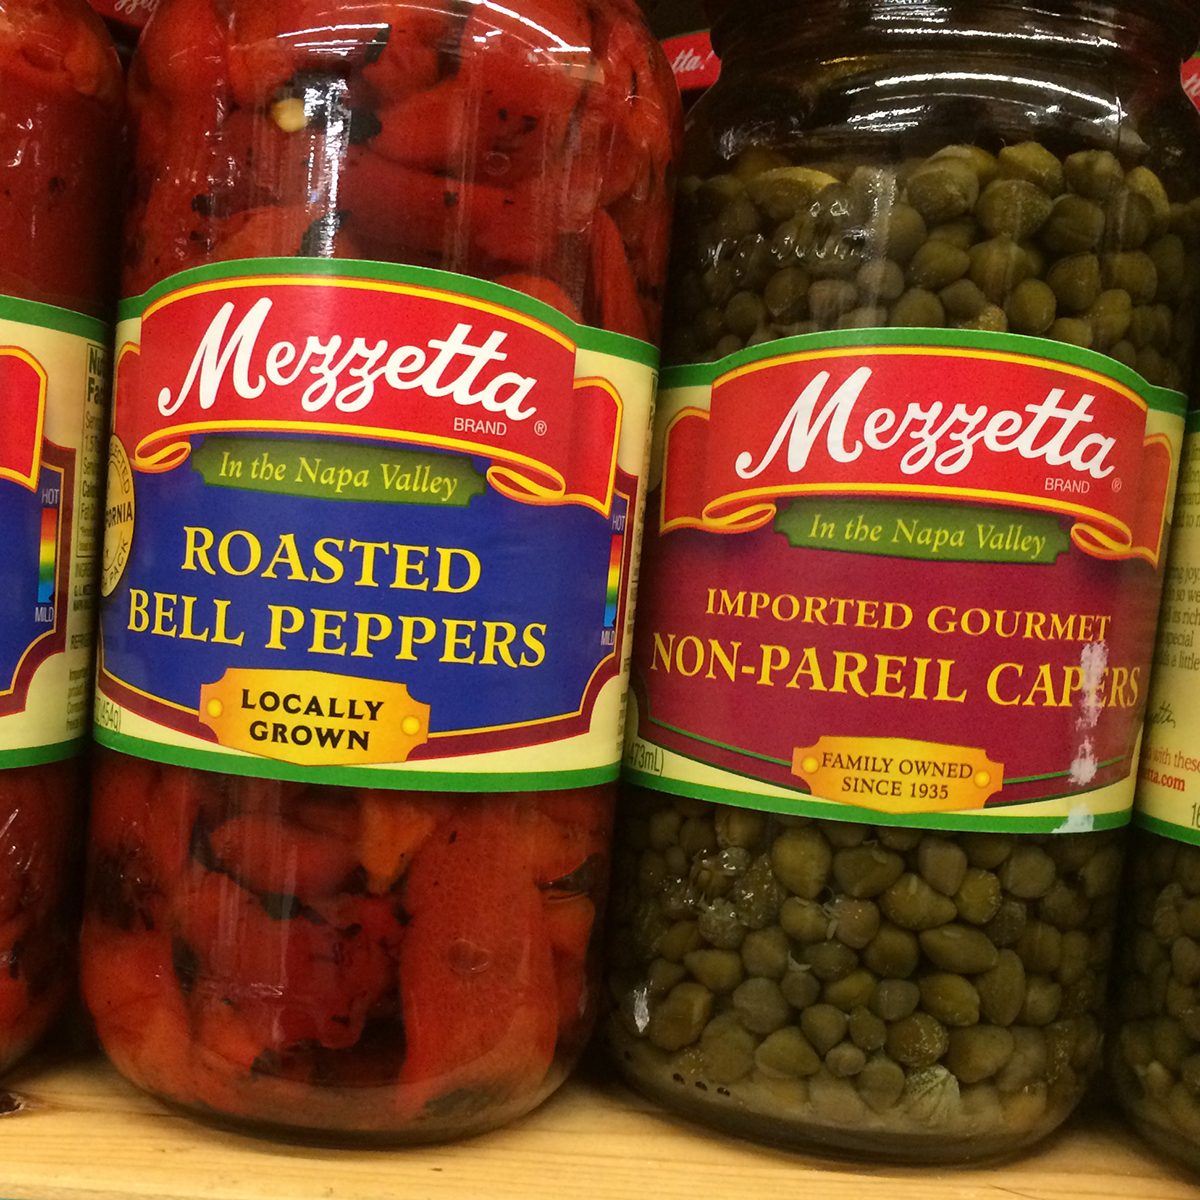 Capers and roasted red peppers at World Market